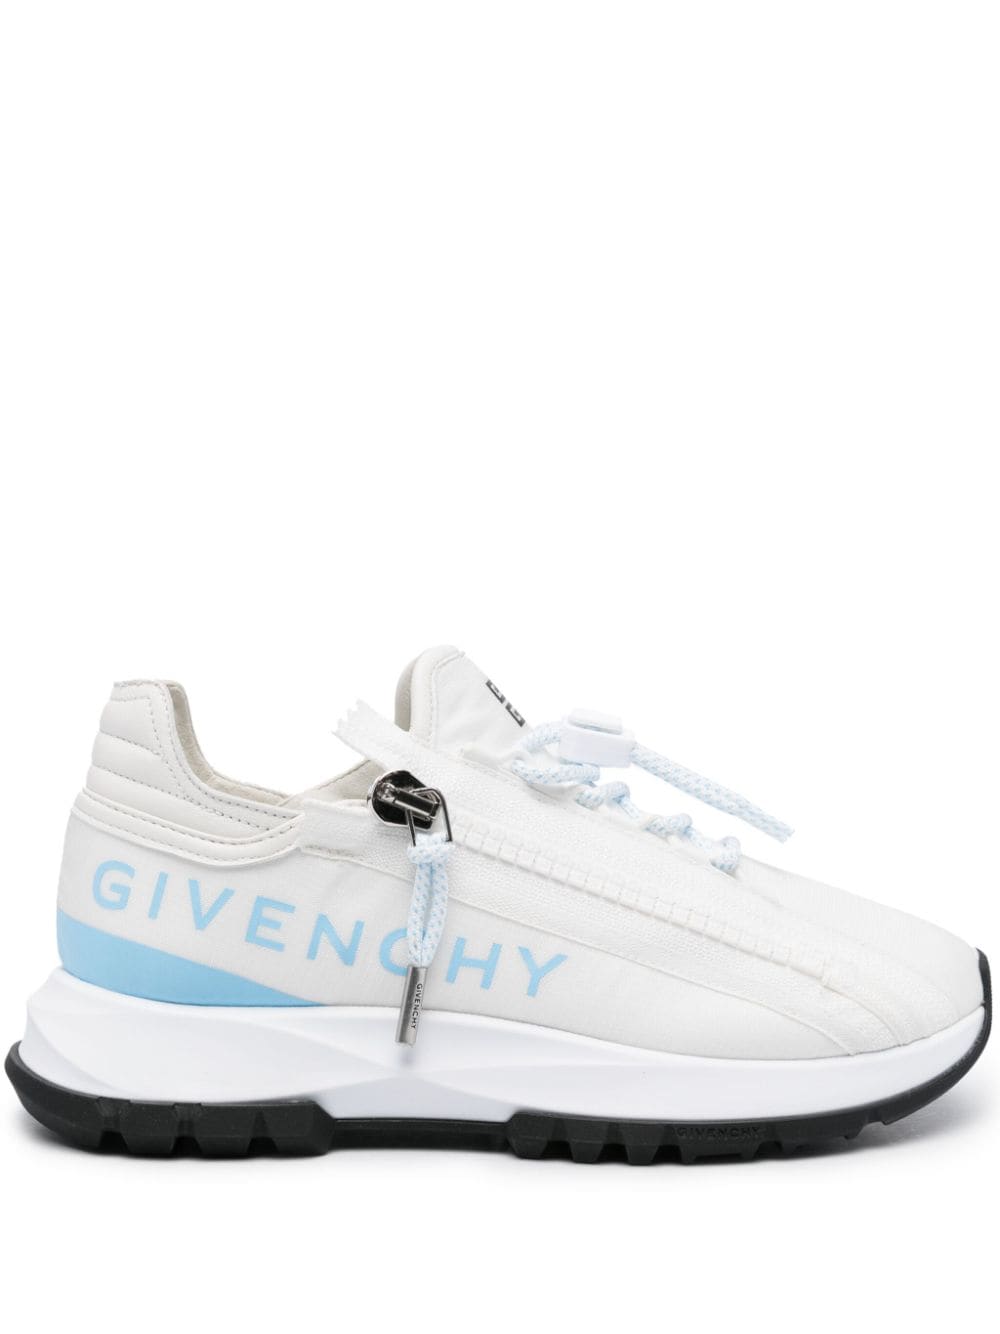 Givenchy Spectre zip-up sneakers - White von Givenchy